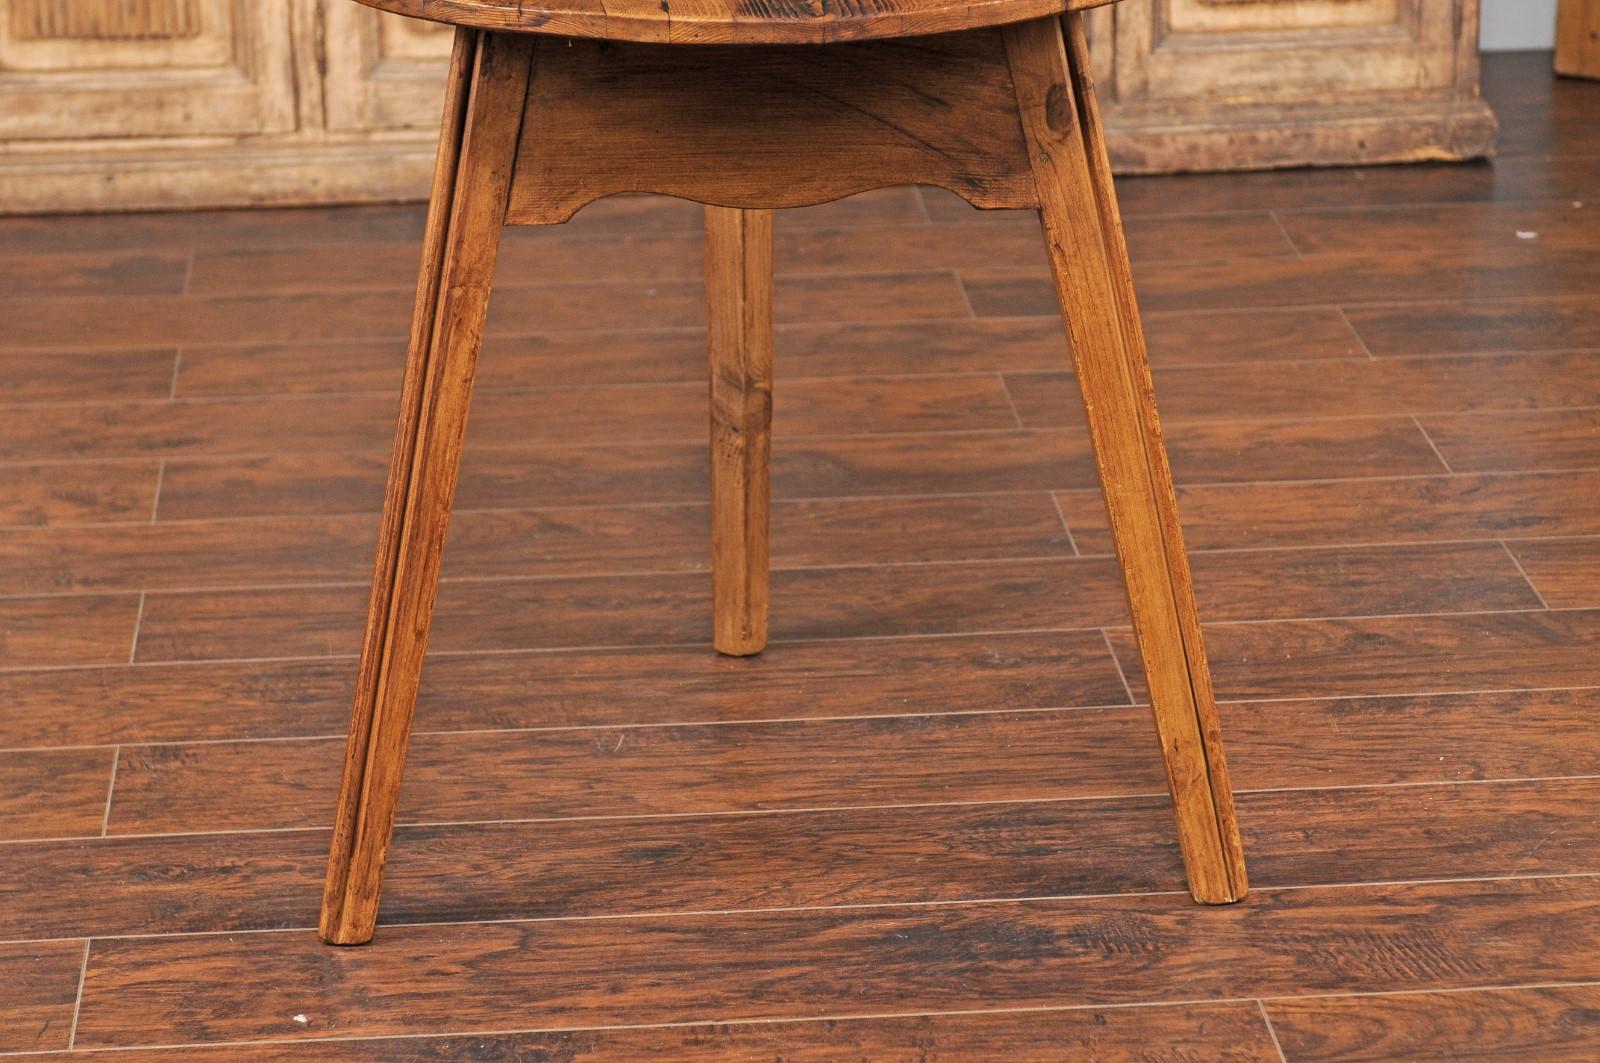 English Turn of the Century Pine Cricket Table with Scalloped Apron, circa 1900 For Sale 5